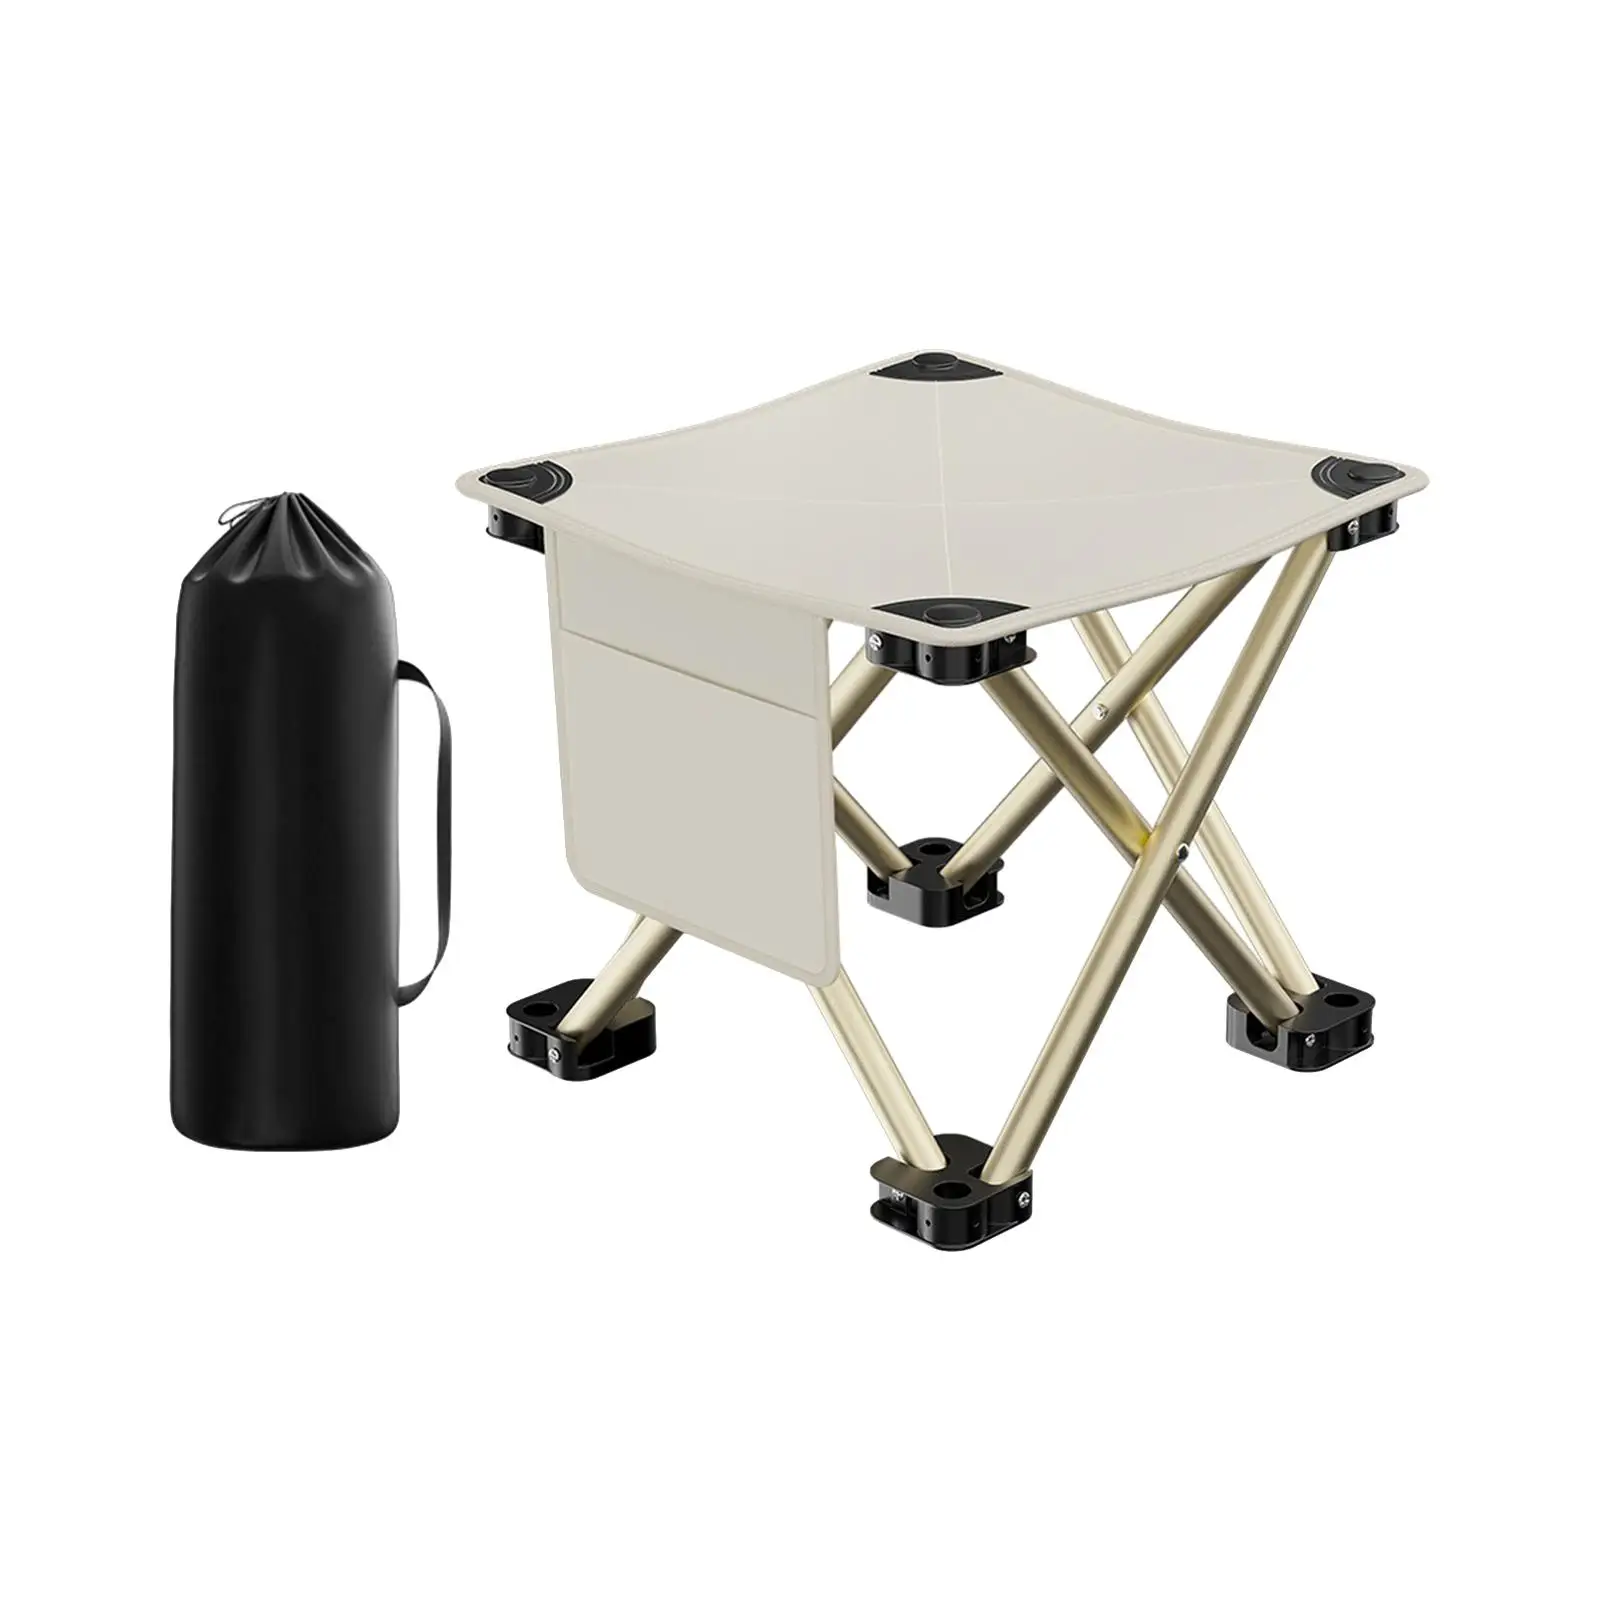 Folding Camping Stool Saddle Chair Triangular Structure Non Slip Pad Foldable Footstool Folding Chair